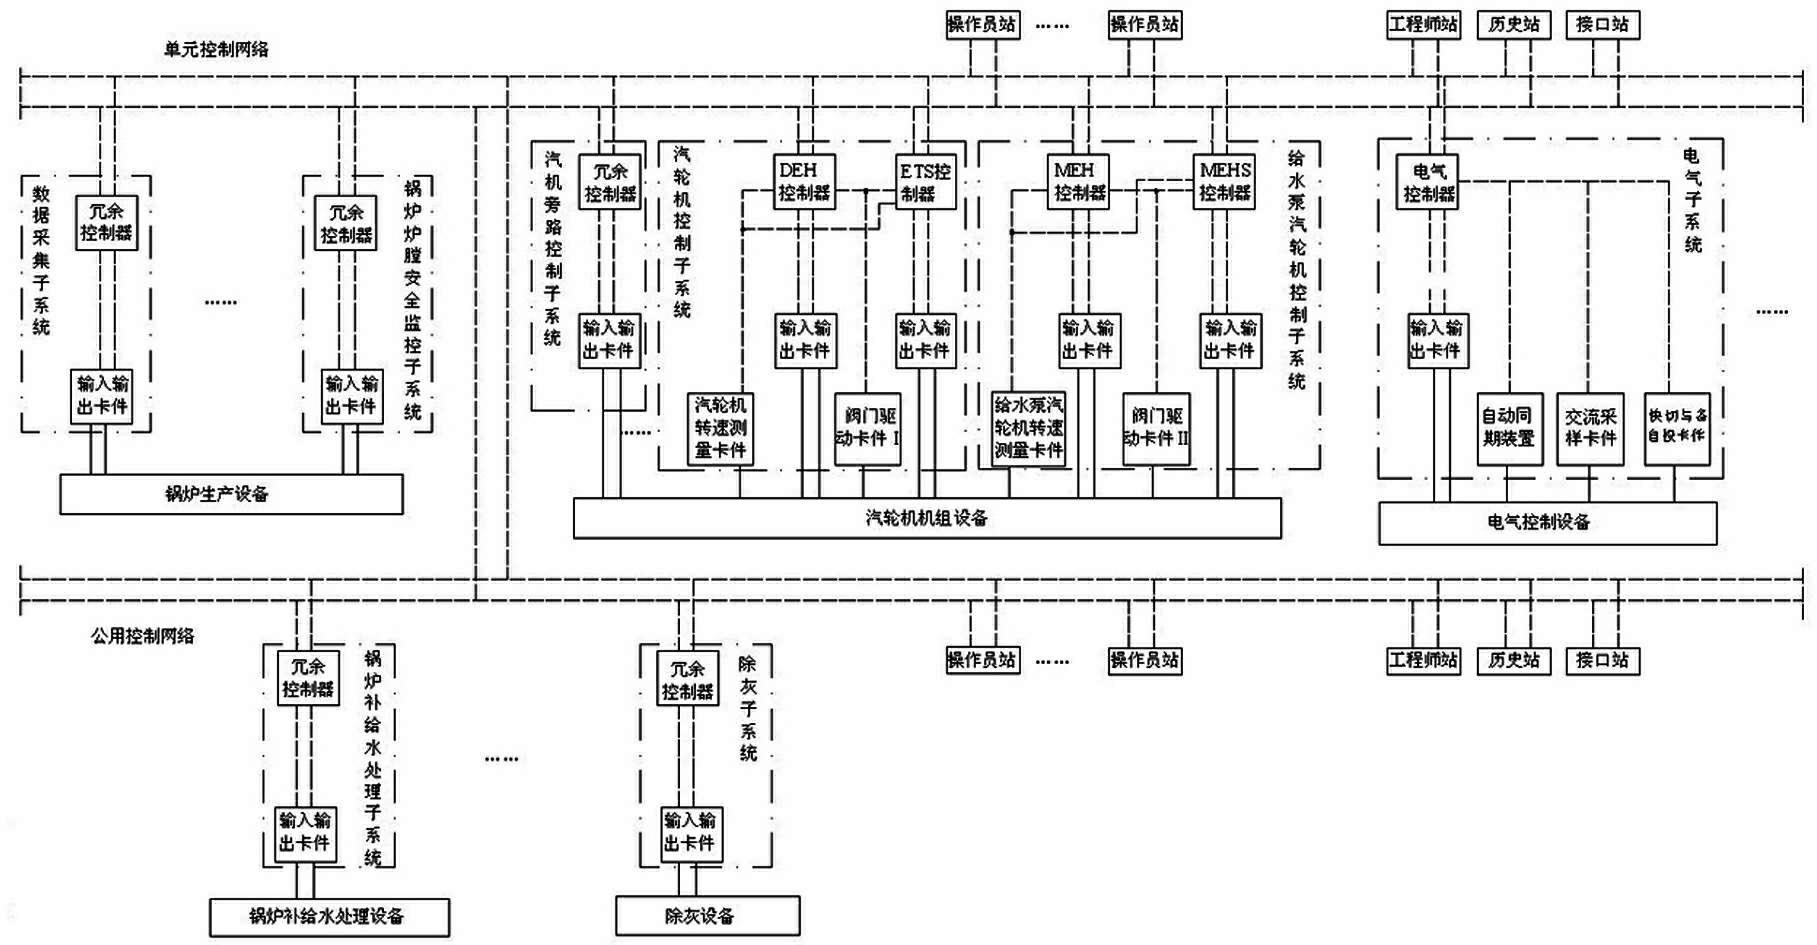 DCS (Distributed Control System) based integrated-control system of coal-fired power plant